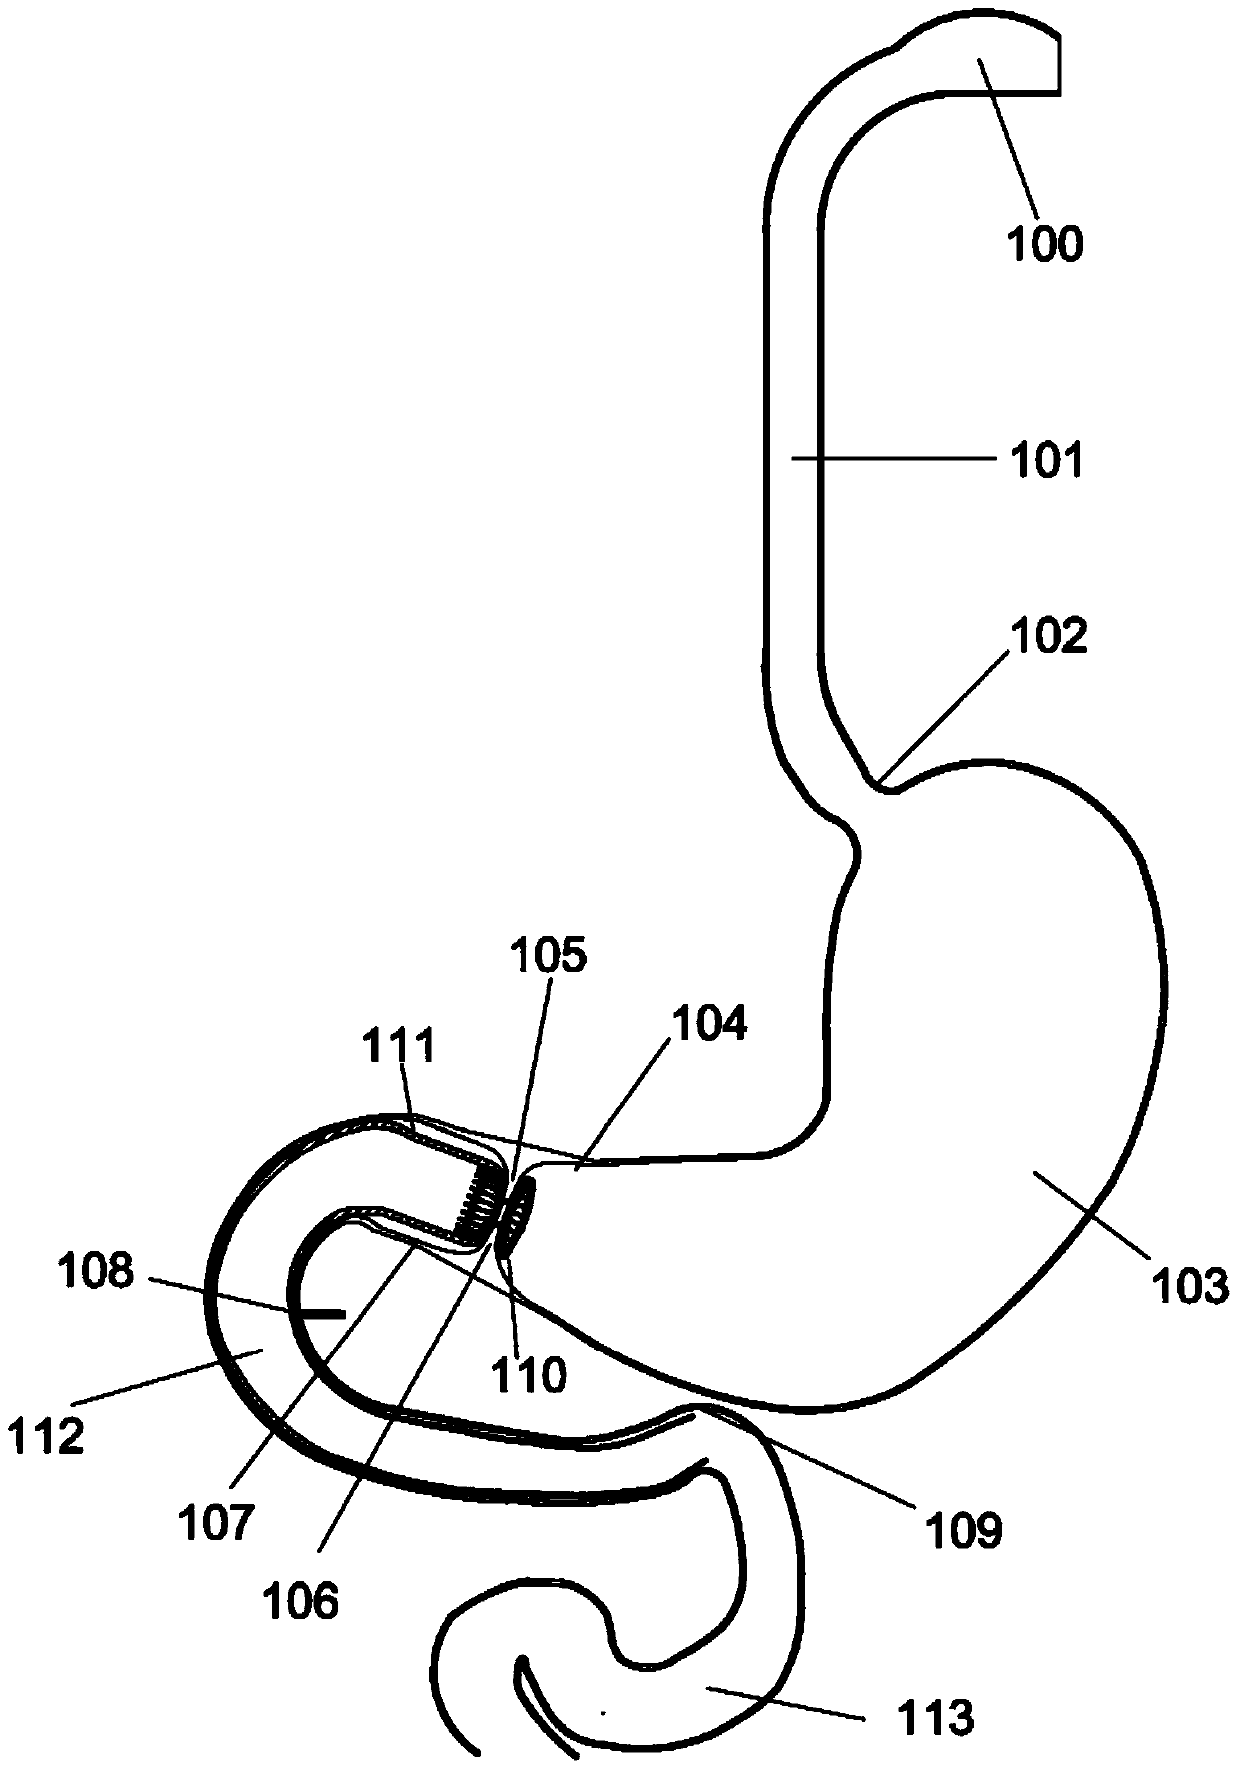 Anchors and methods for intestinal bypass sleeves